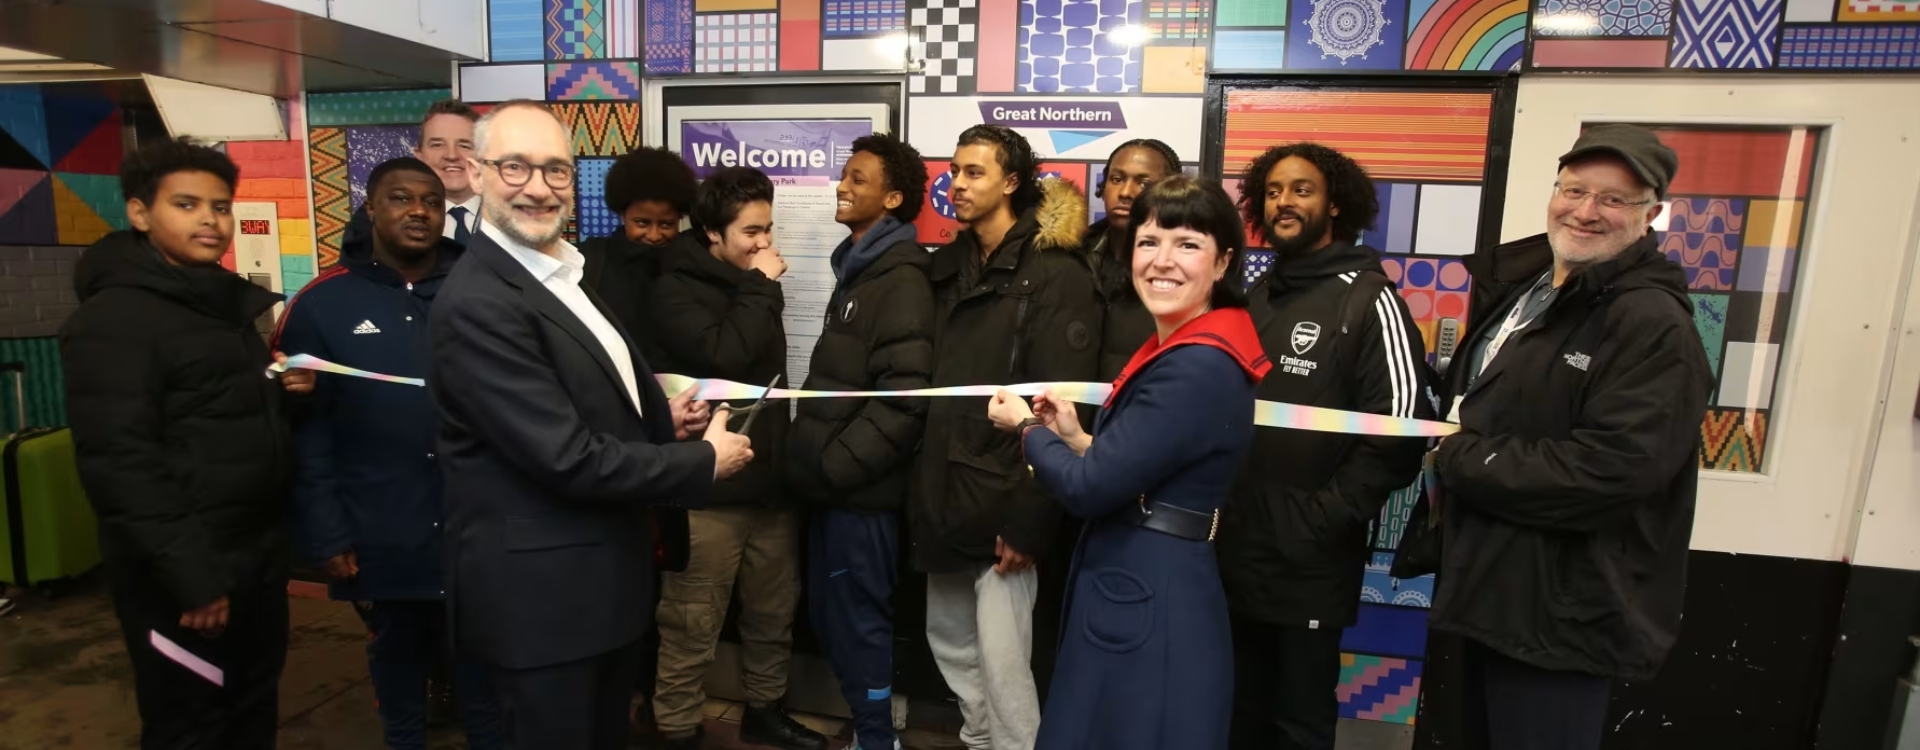 Diversity and togetherness: community mural unveiled at Finsbury Park station